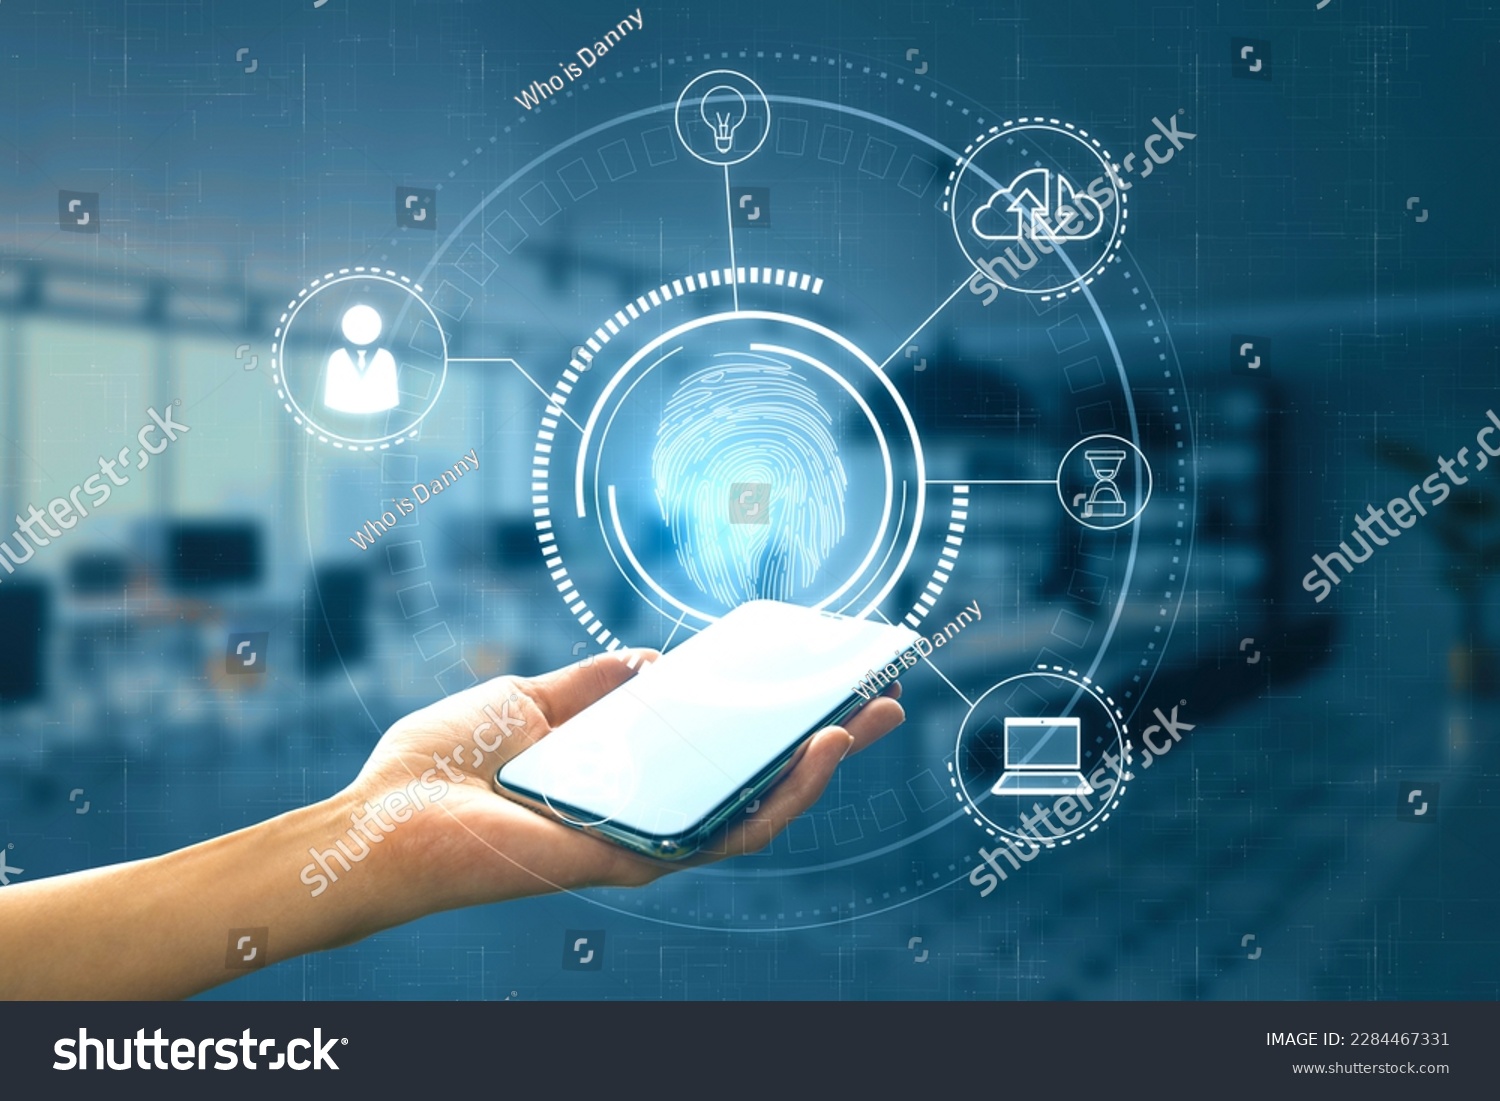 Photo showing a hand holding a phone and icons surround the phone showing the fact that it contains the person's information